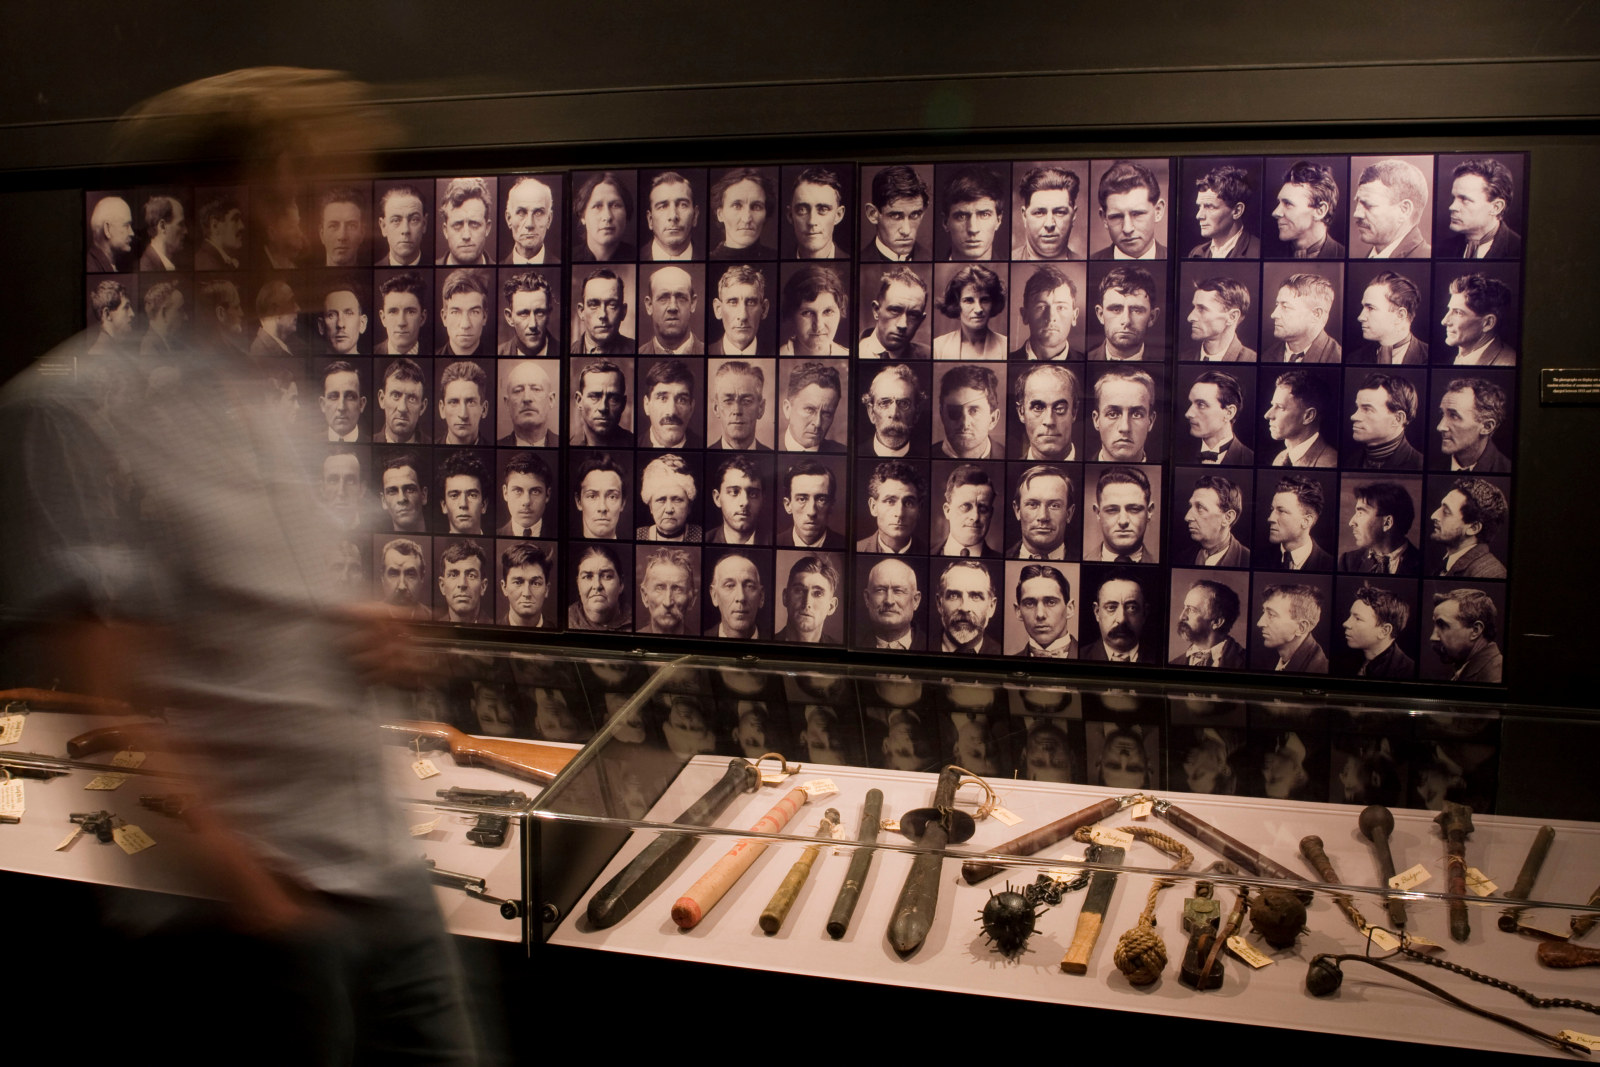 Photo showing person rushing past a photographic display of portraits and weapons under glass in a showcase.